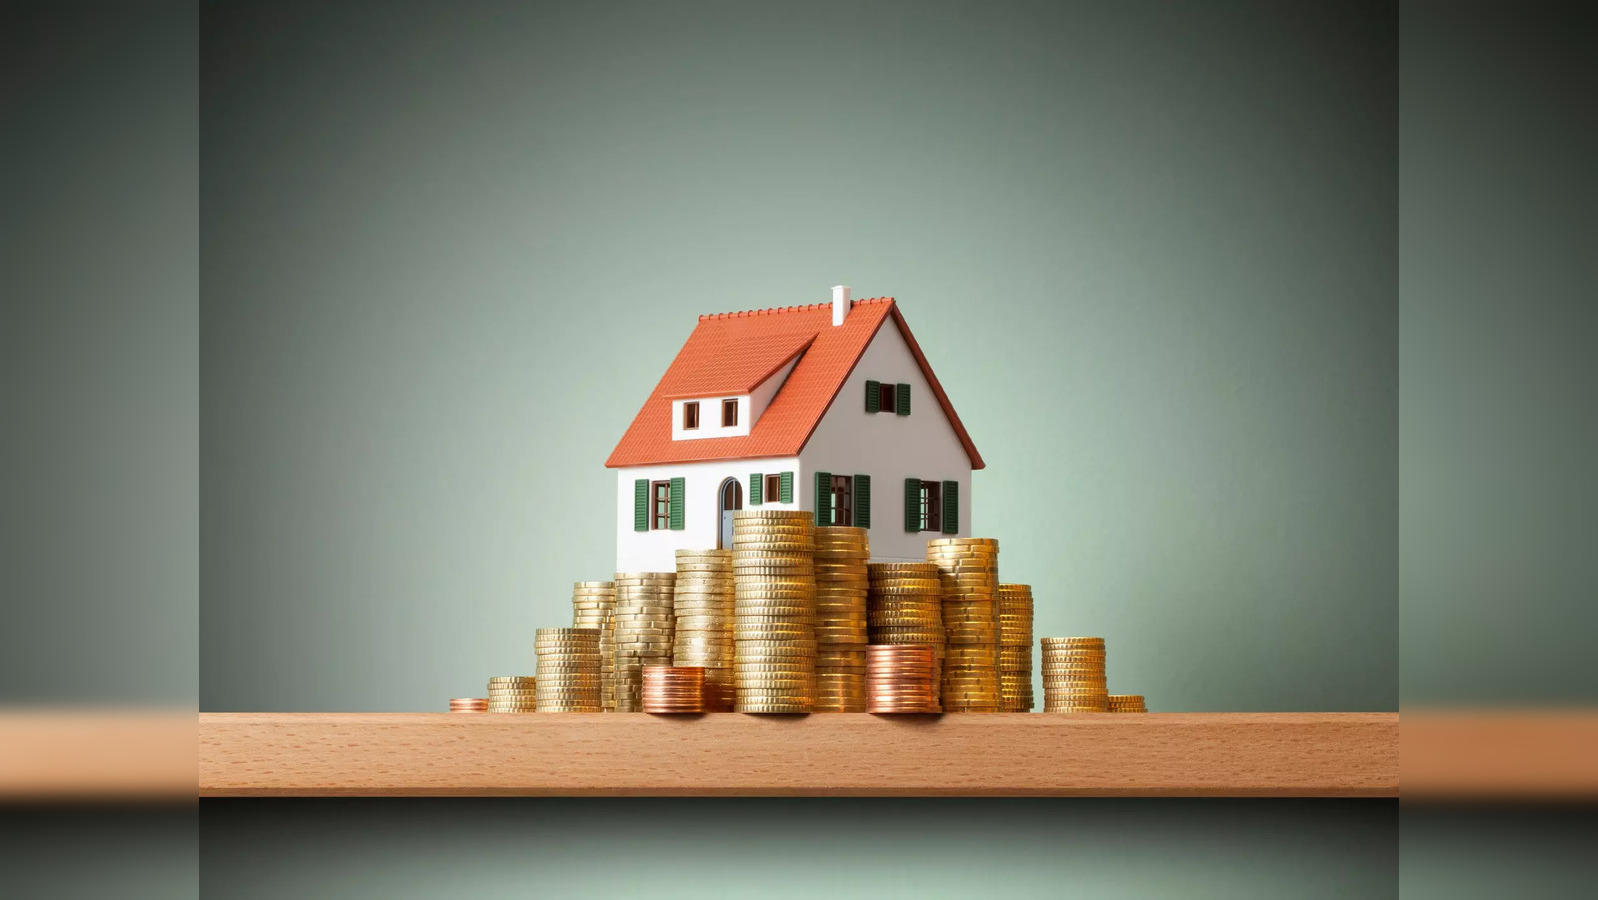 Real Estate Investment: 4 reasons why treating real estate as an investment  is wrong - The Economic Times